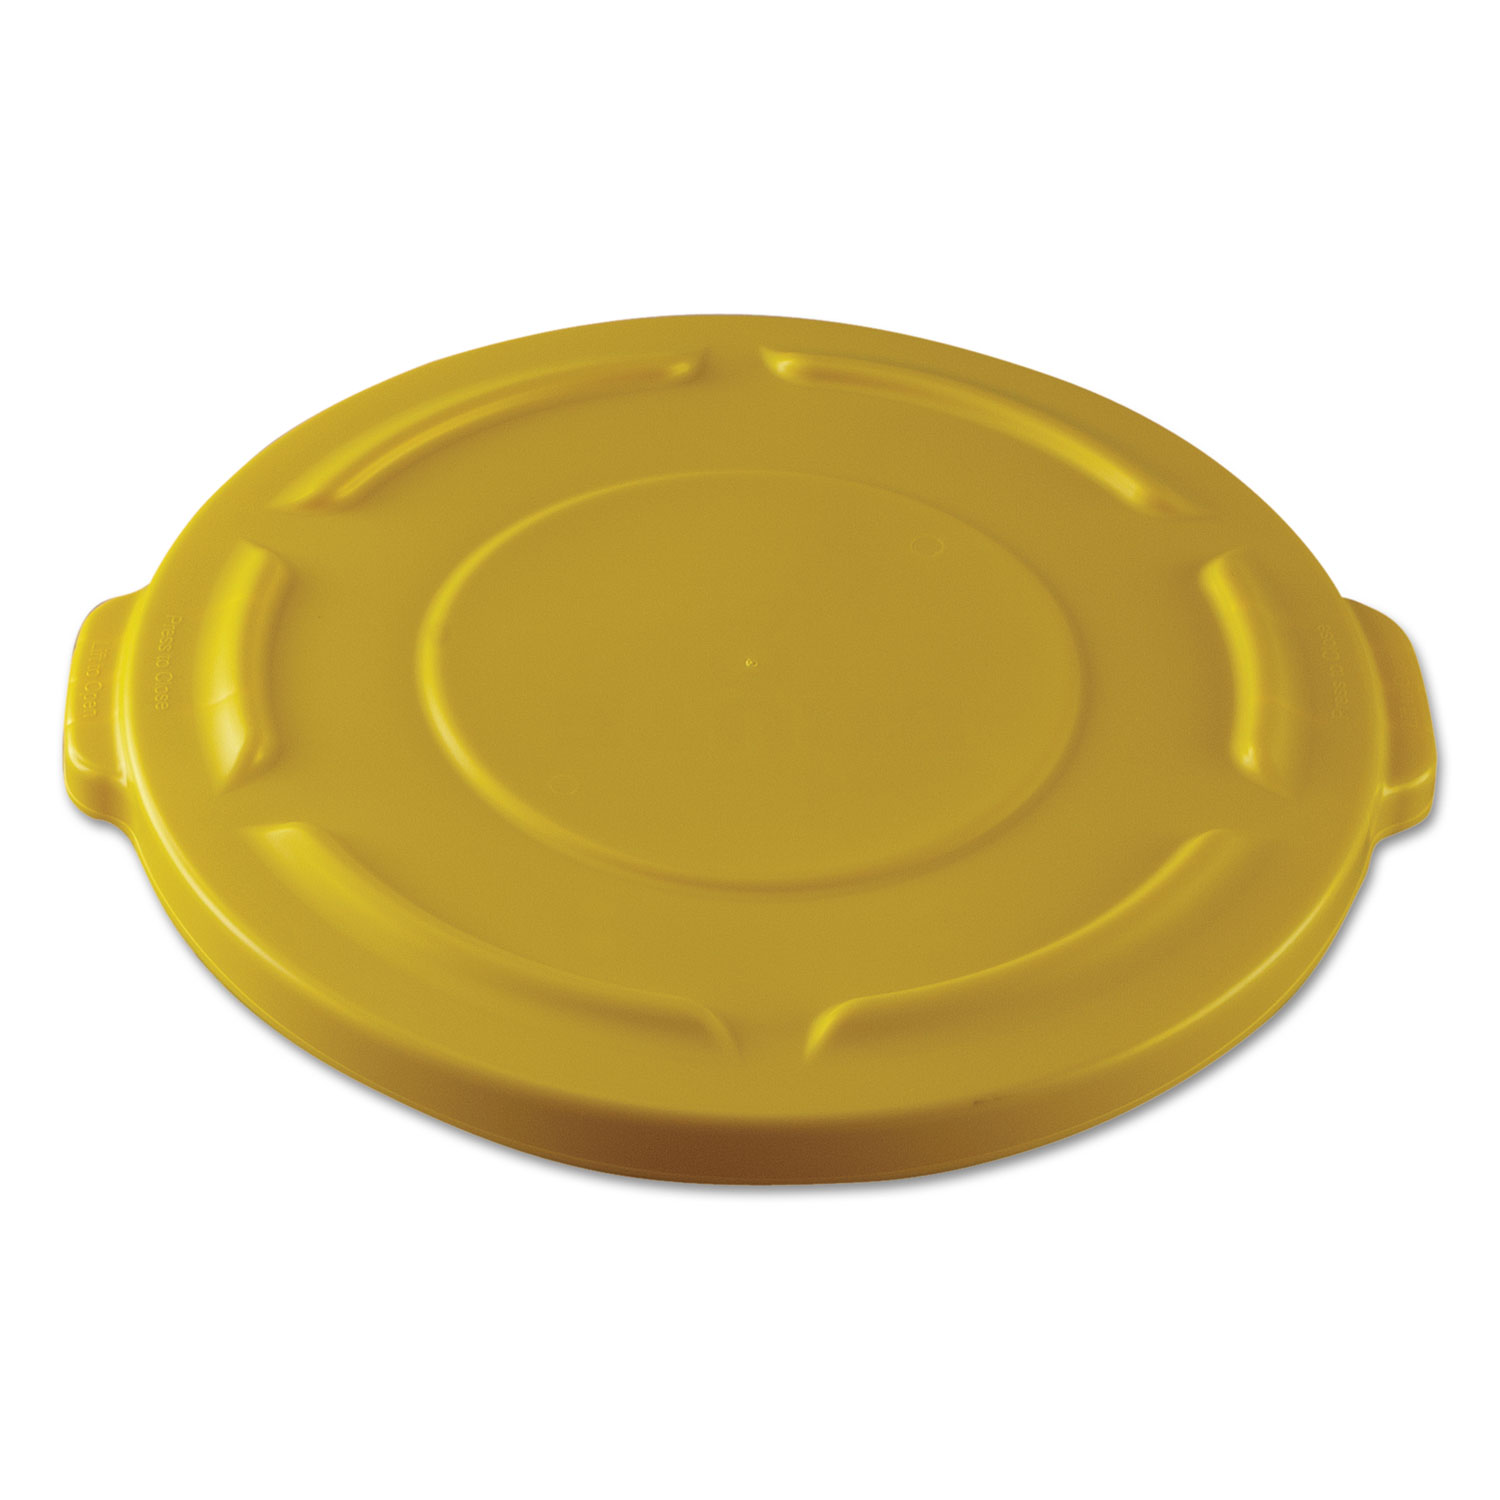 Round Flat Top Lid, for 20-Gallon Round Brute Containers, 19 4/5